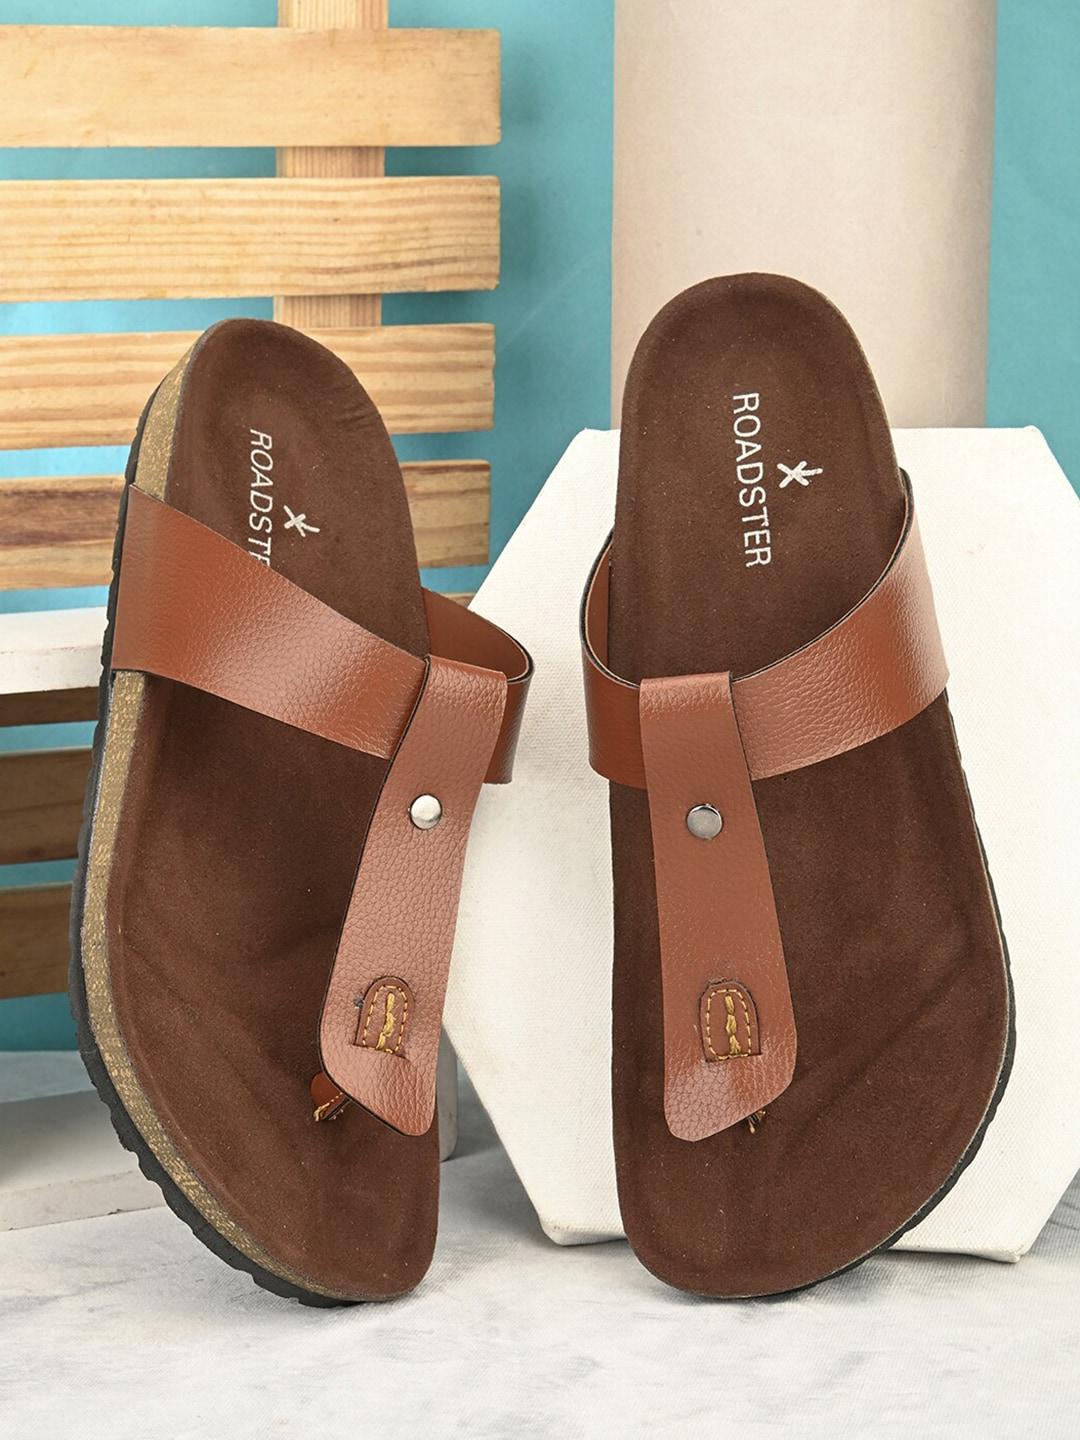 The Roadster Lifestyle Co. Tan Slip-On Comfort Sandals